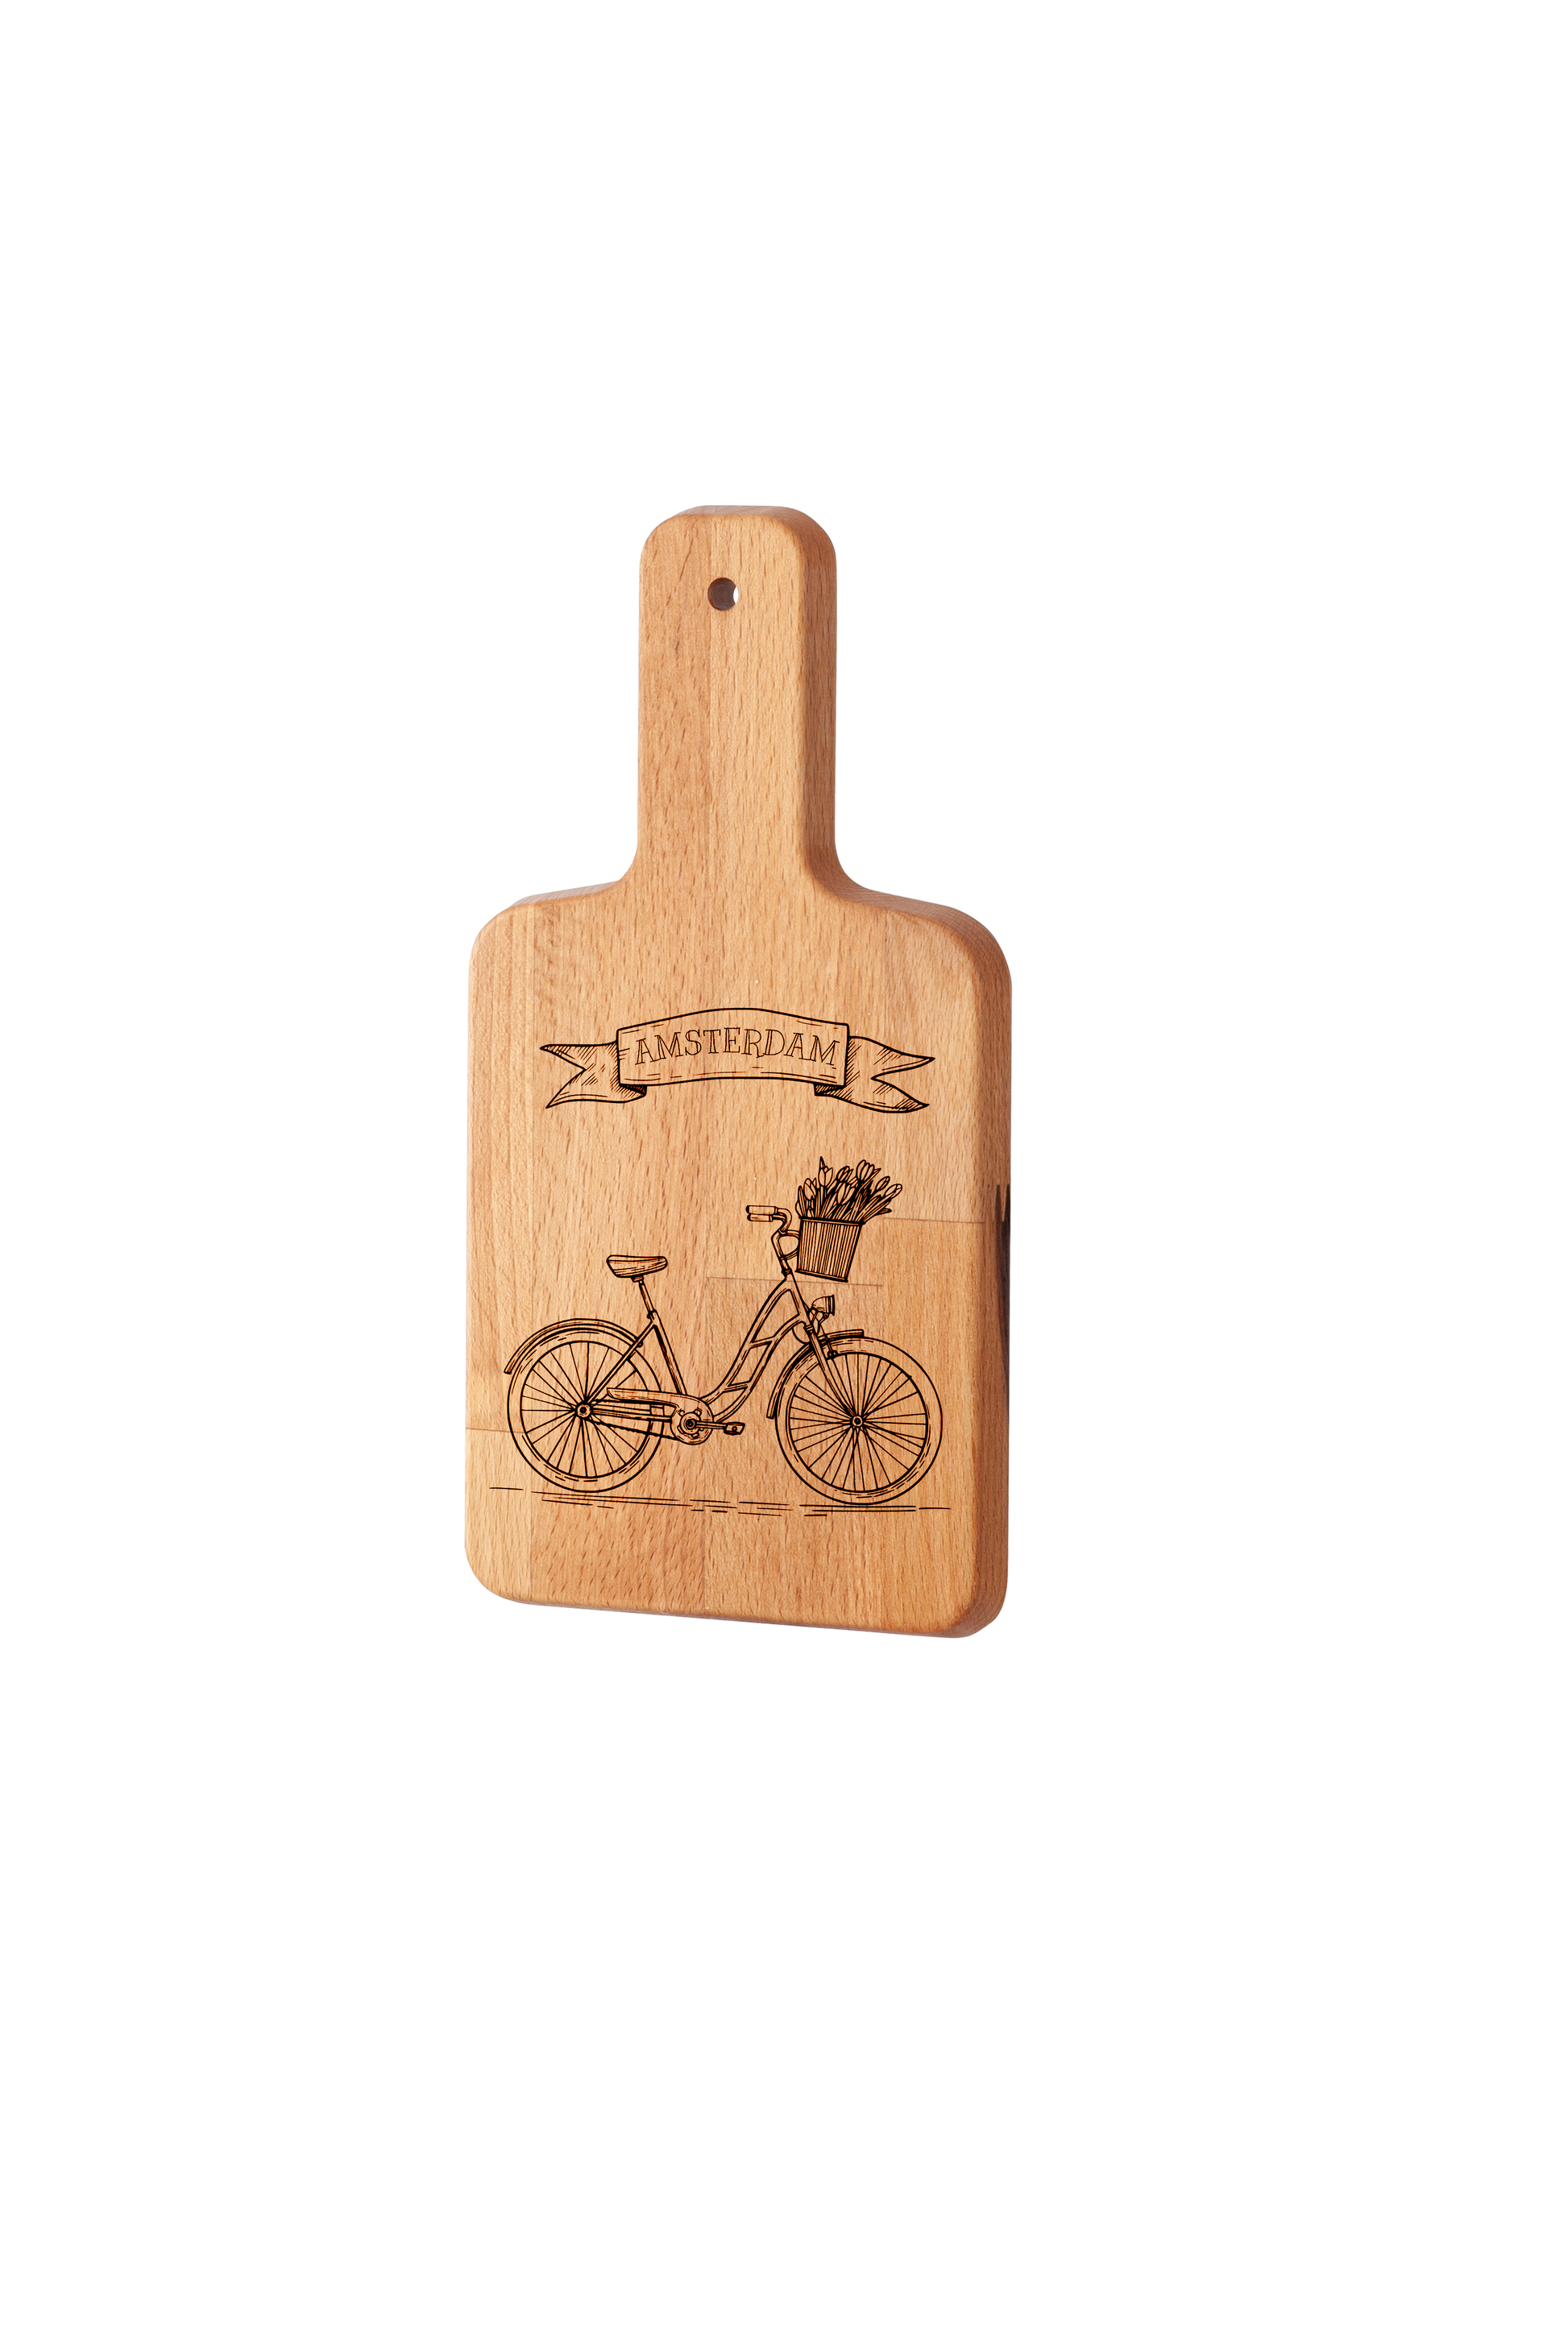 Amsterdam, Bicycle, cheese board, side view